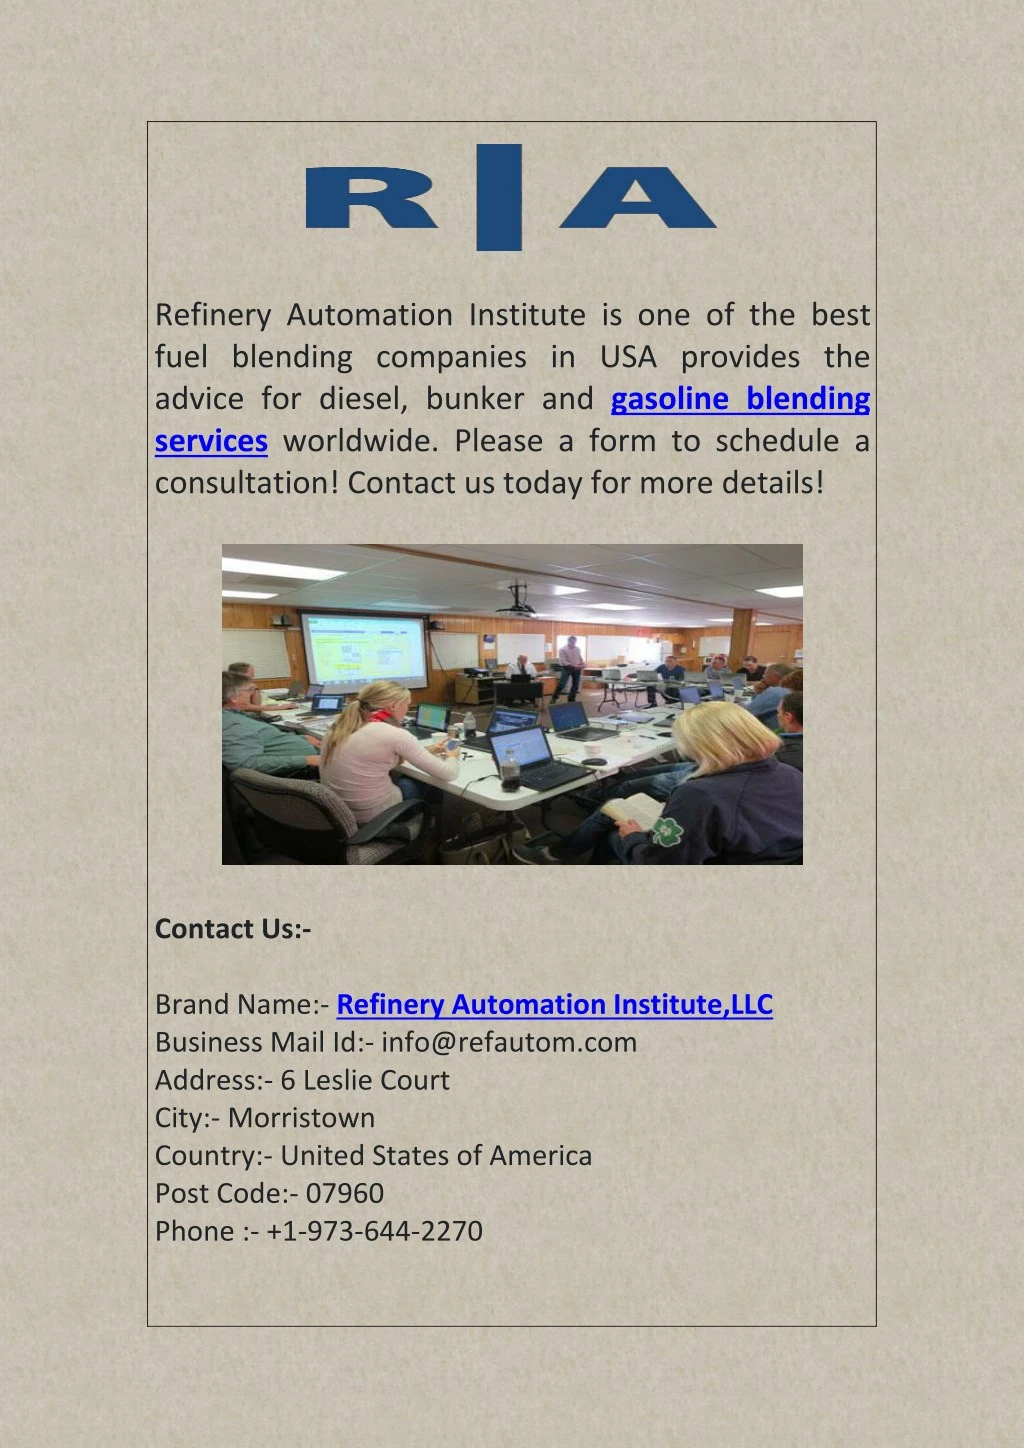 refinery automation institute is one of the best